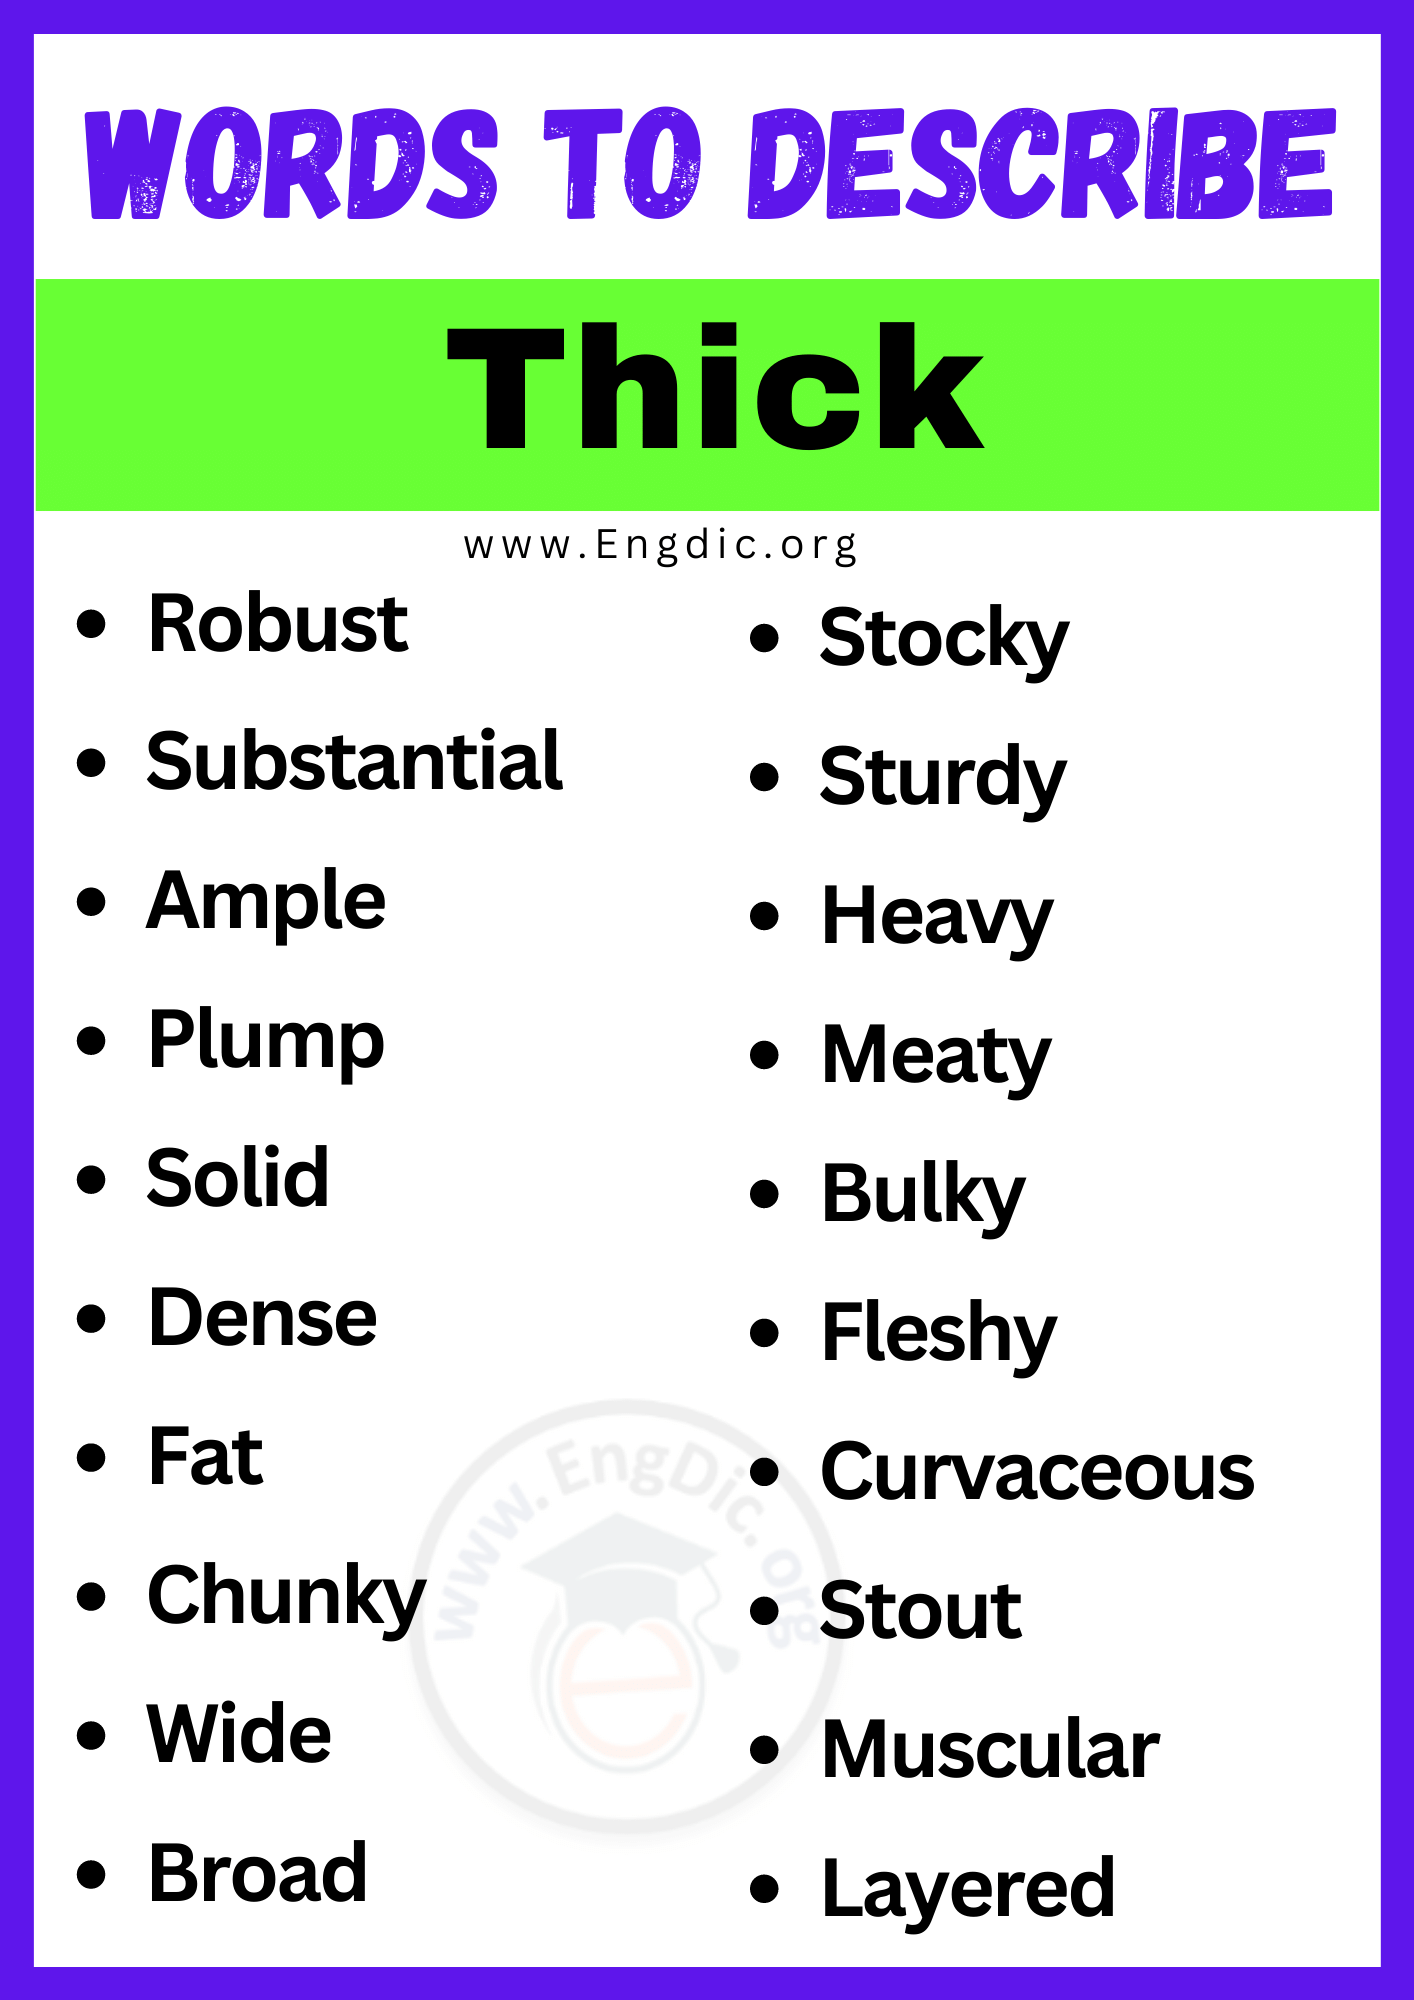 Words to Describe a Thick